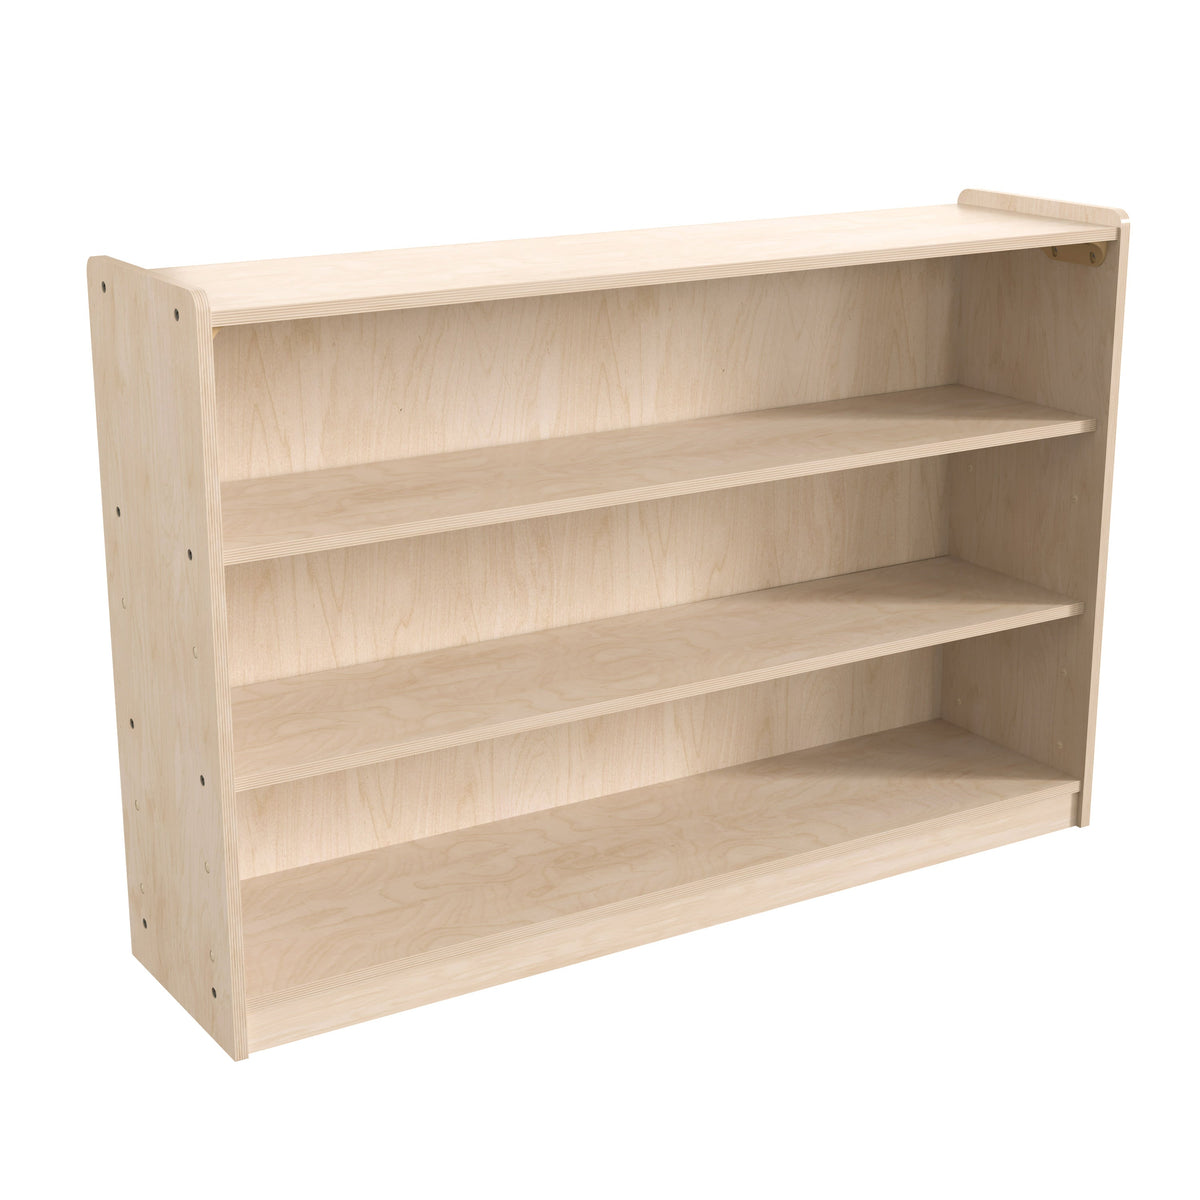 Commercial Grade Natural Finish Wooden Classroom Extra Wide 3 Shelf Storage Unit